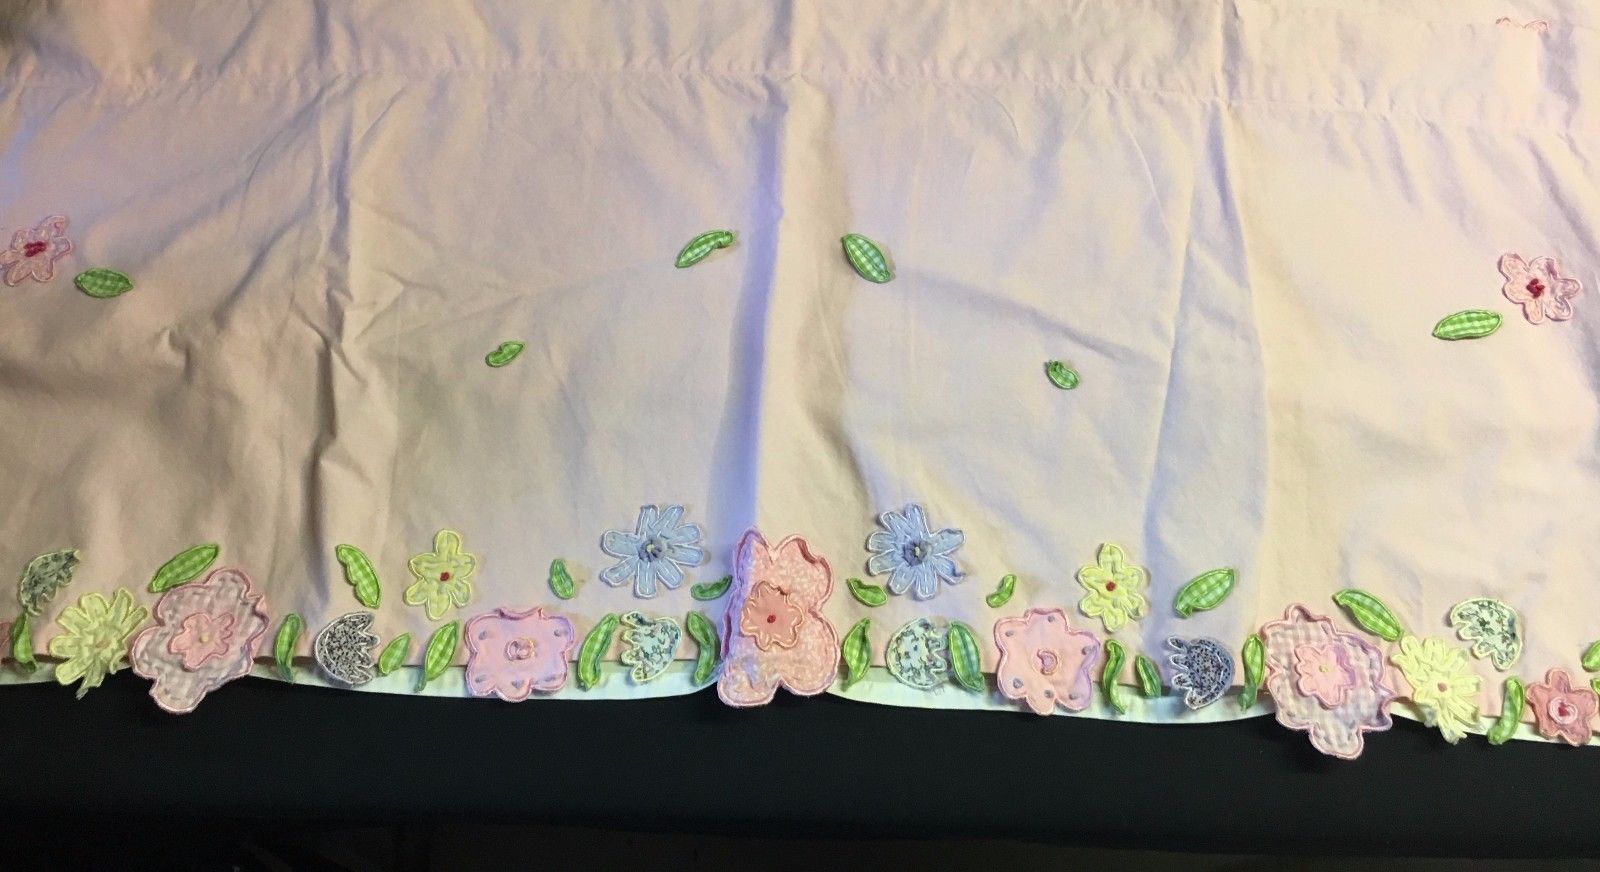 POTTERY BARN KIDS DAISY GARDEN VALANCE 44 x 18 PINK FLORAL GINGHAM TRIM LINED 